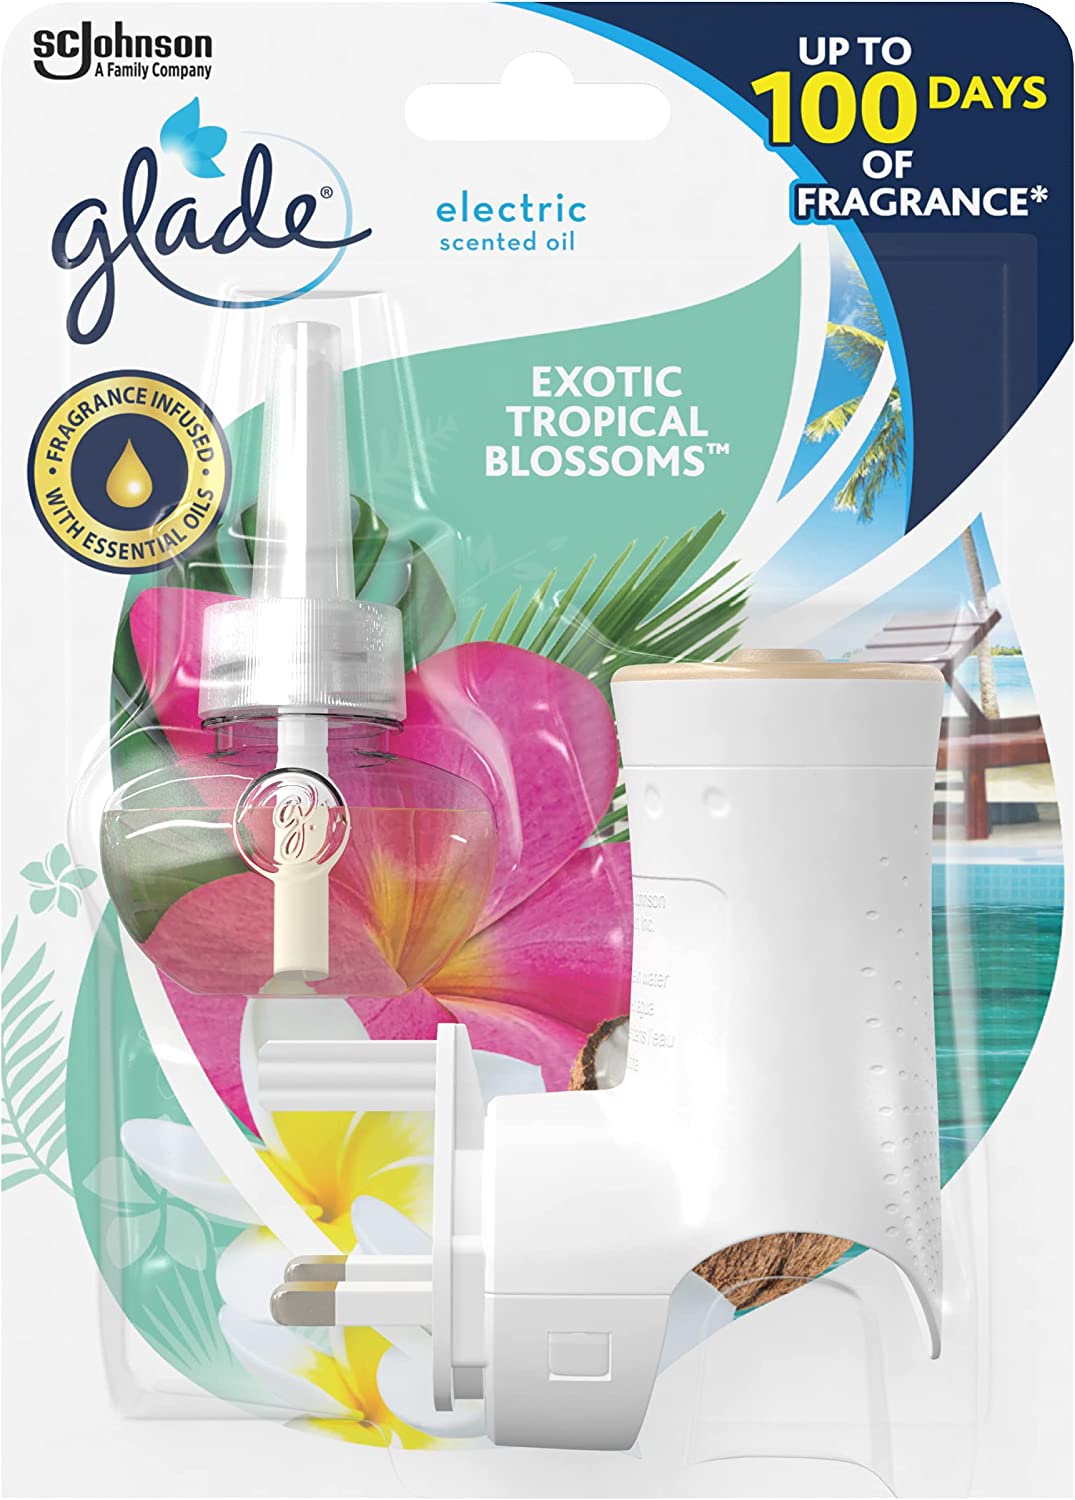 Glade Electric Scented Oil Holder & Refill, Plug in Air Freshener for Home, Starter Kit + 20 Ml Refill, Tropical Blossoms, Pack of 1, Packaging May Vary - FoxMart™️ - SCJohnson